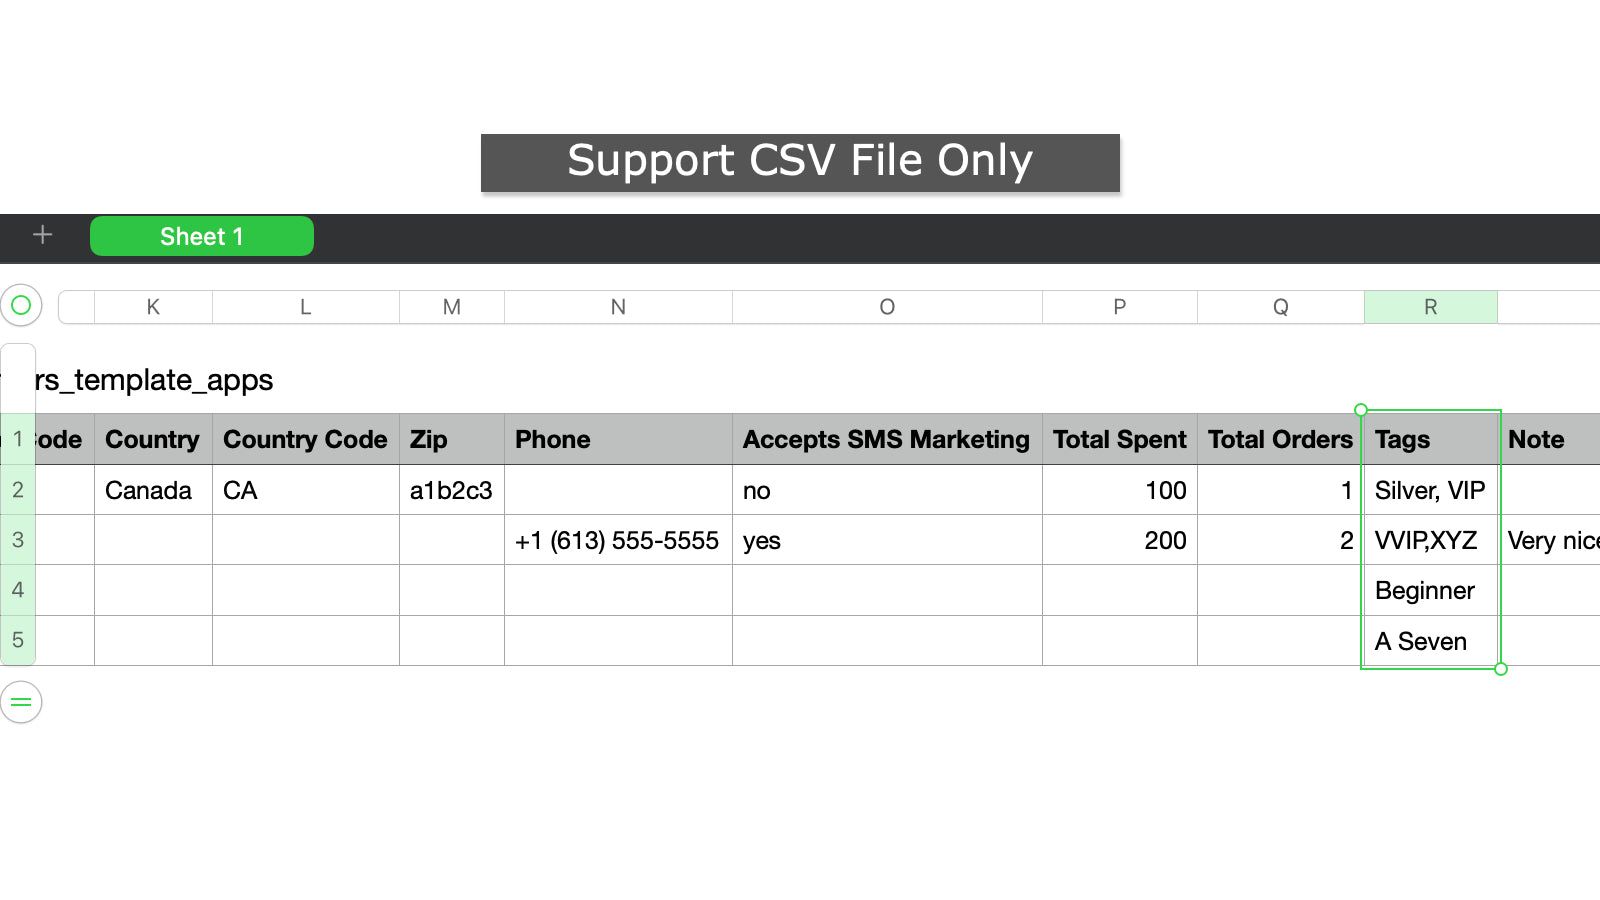 Support customer CSV template